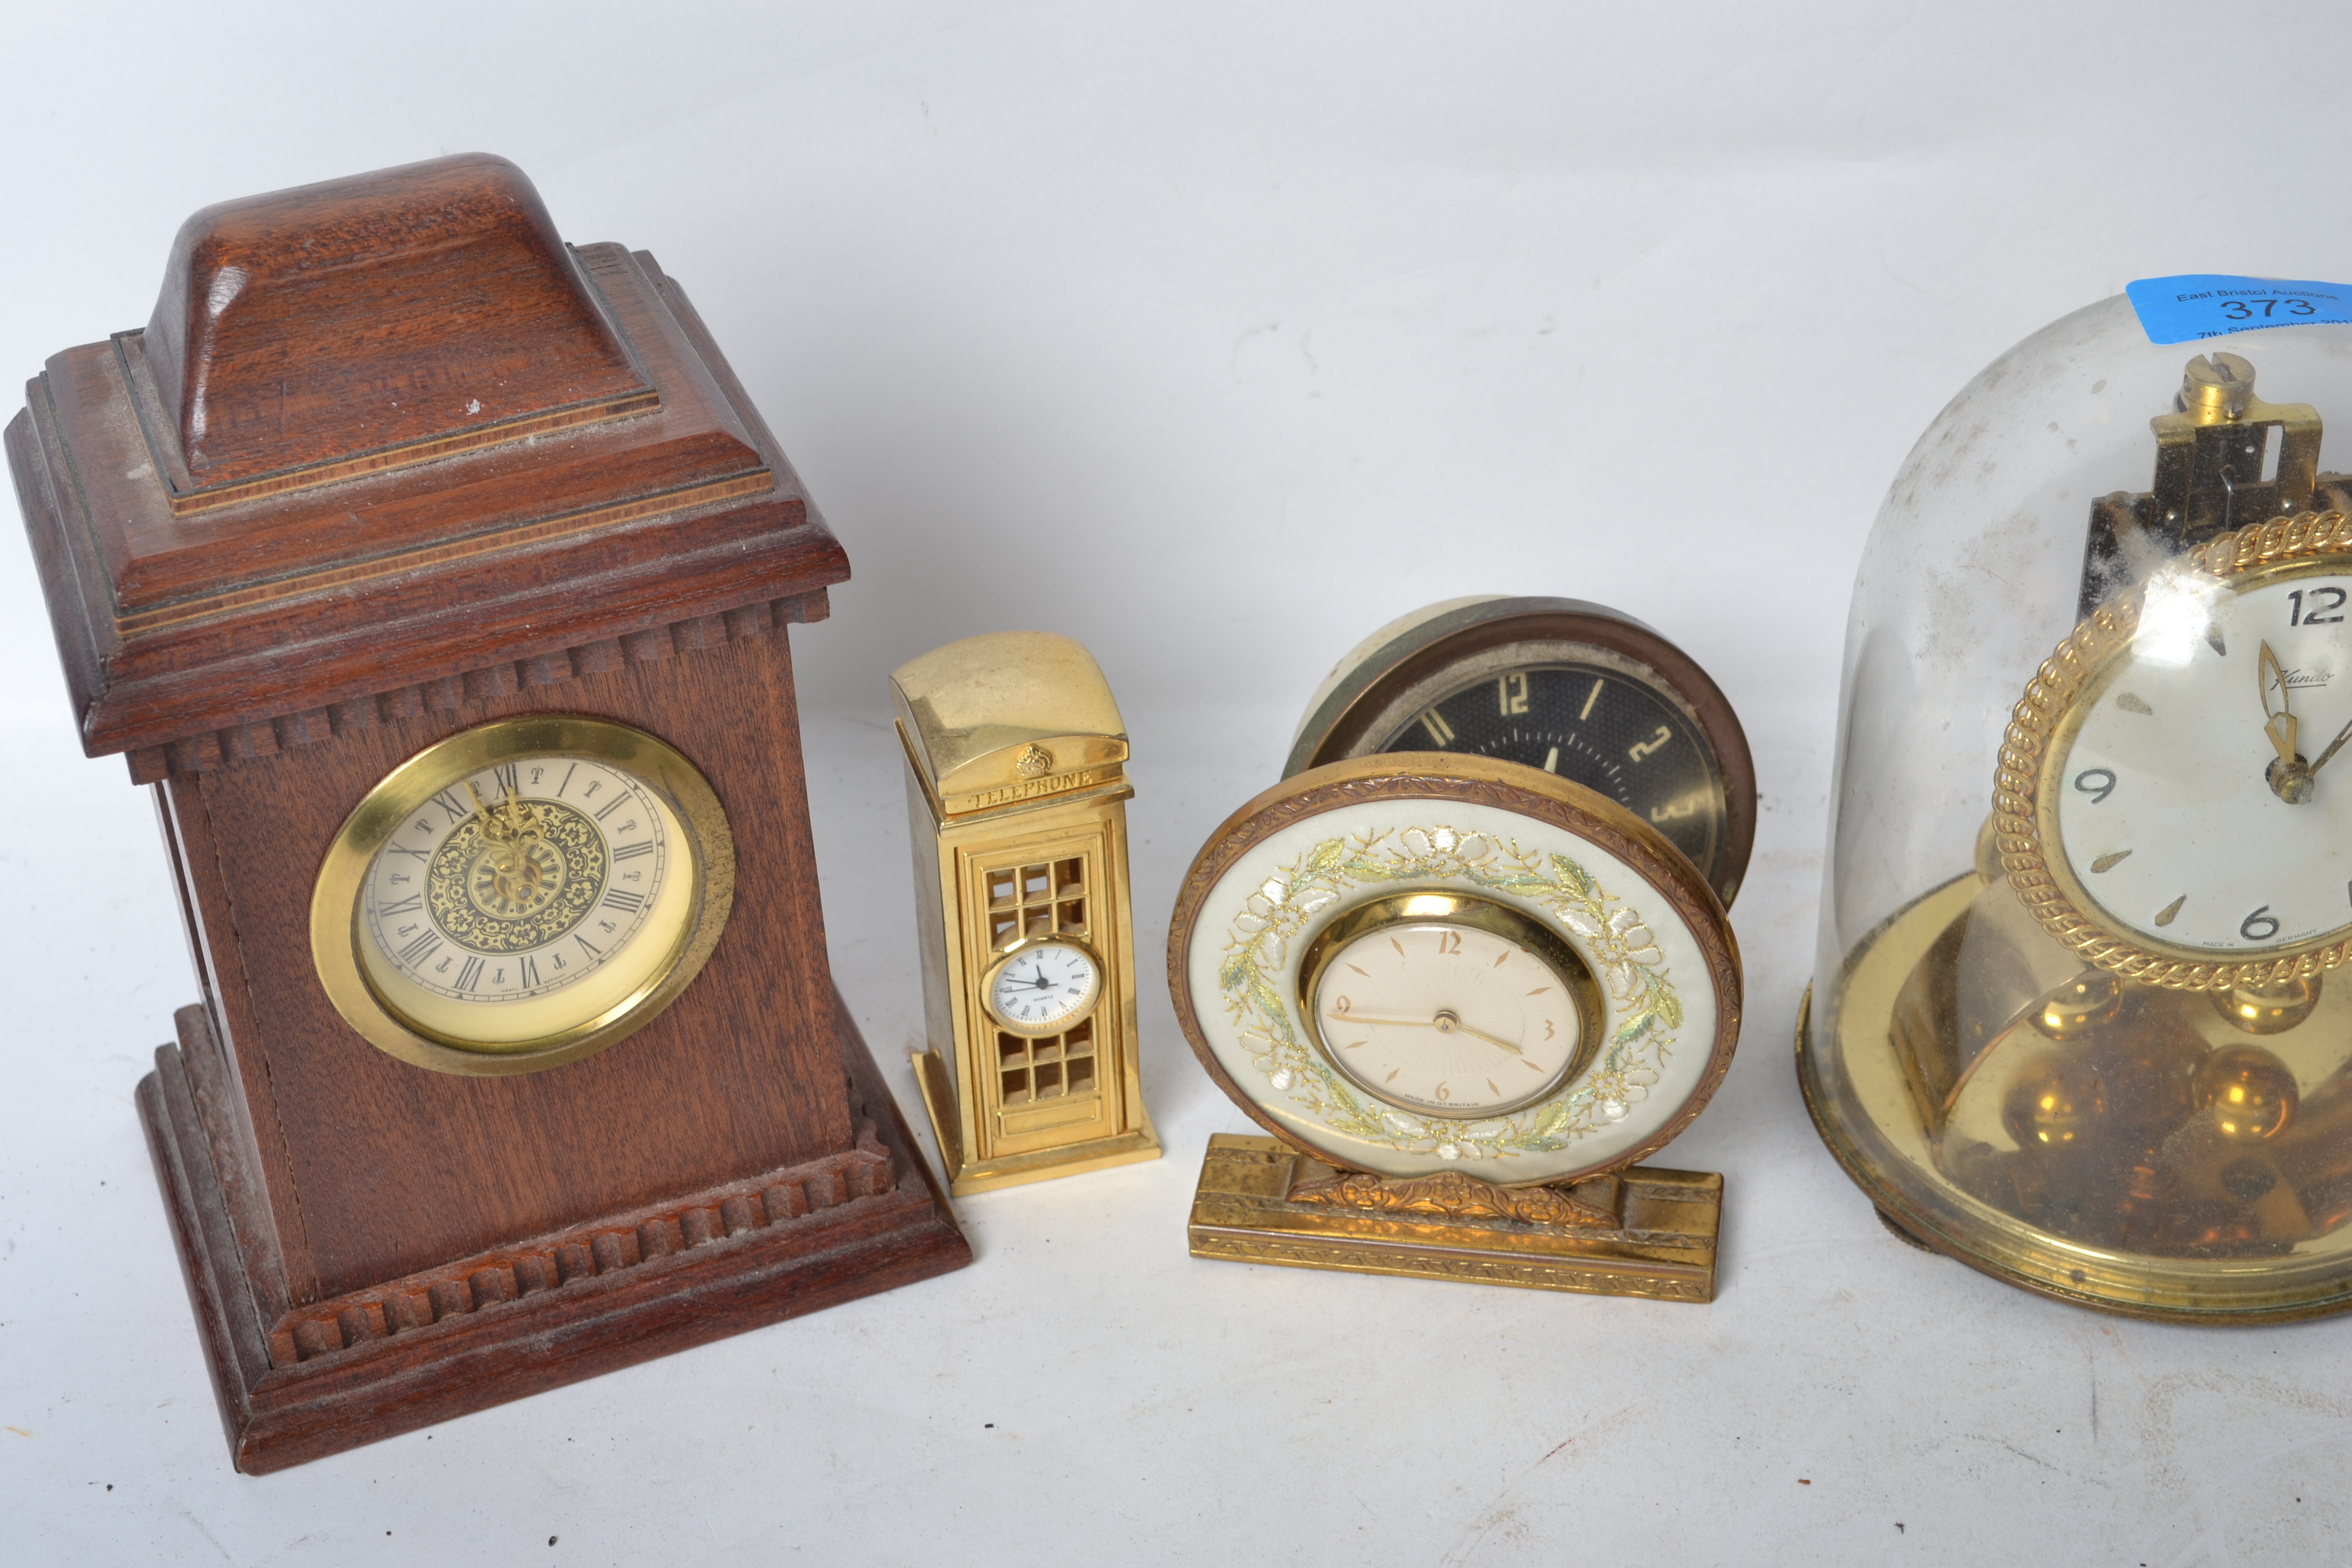 A collection of vintage and retro 20th century clocks to include Cuckoo clocks, travel clocks such - Image 3 of 3